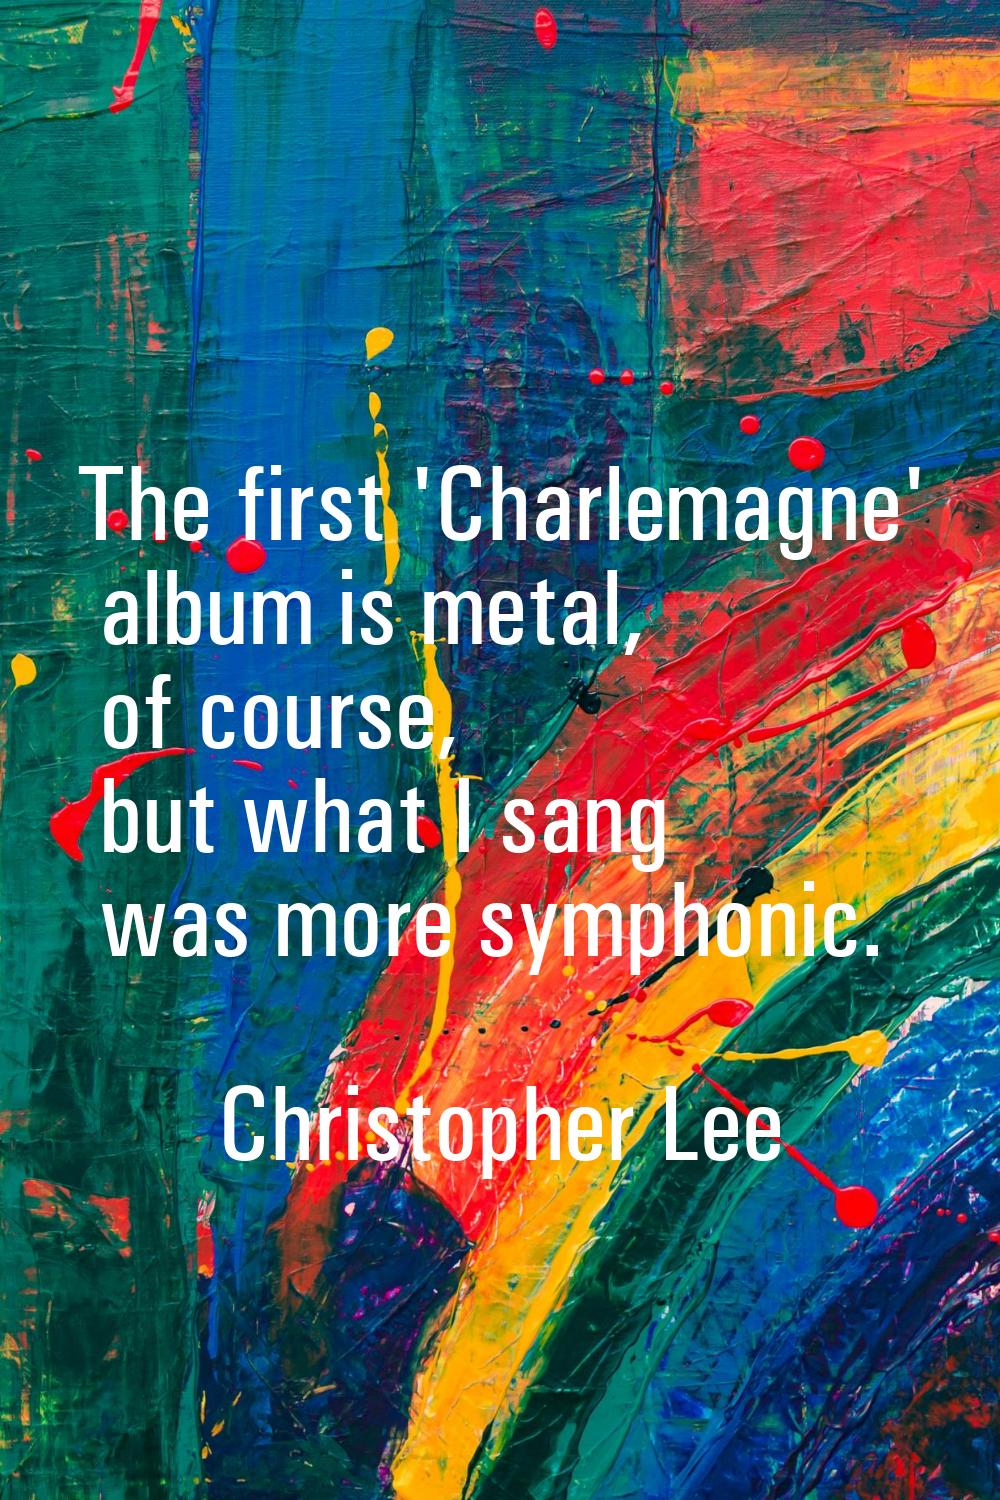 The first 'Charlemagne' album is metal, of course, but what I sang was more symphonic.